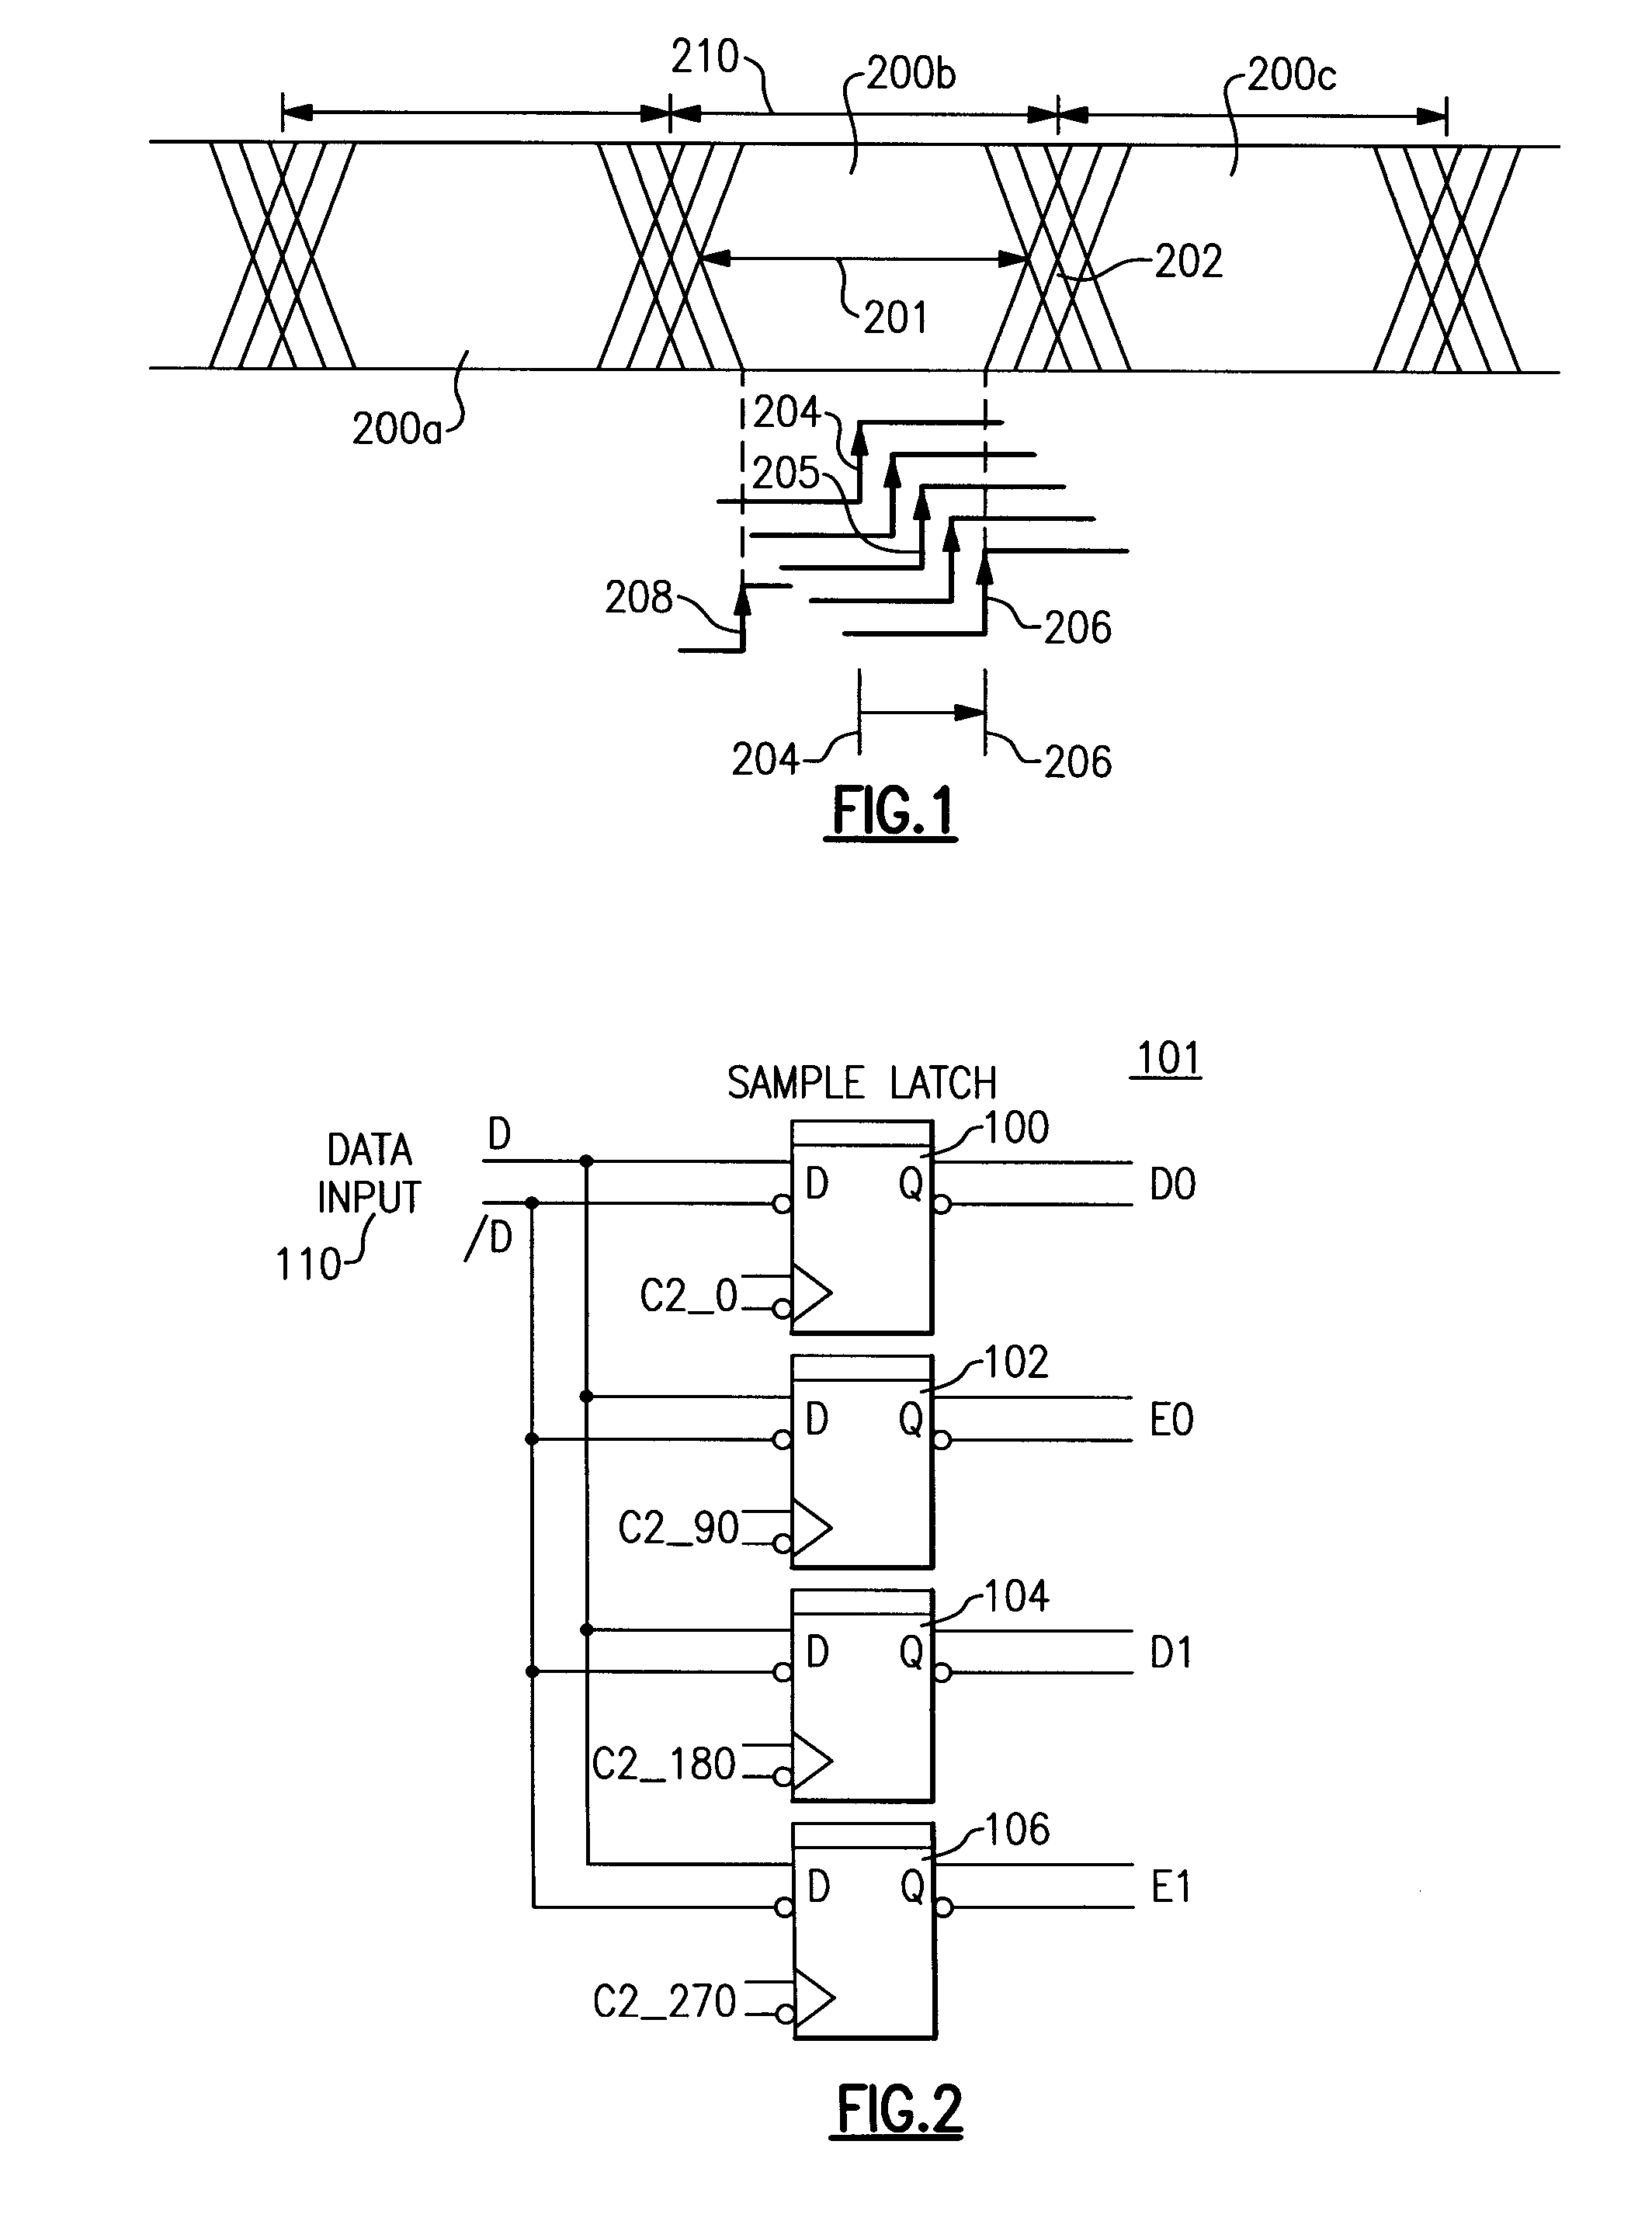 System for measuring an eyewidth of a data signal in an asynchronous system